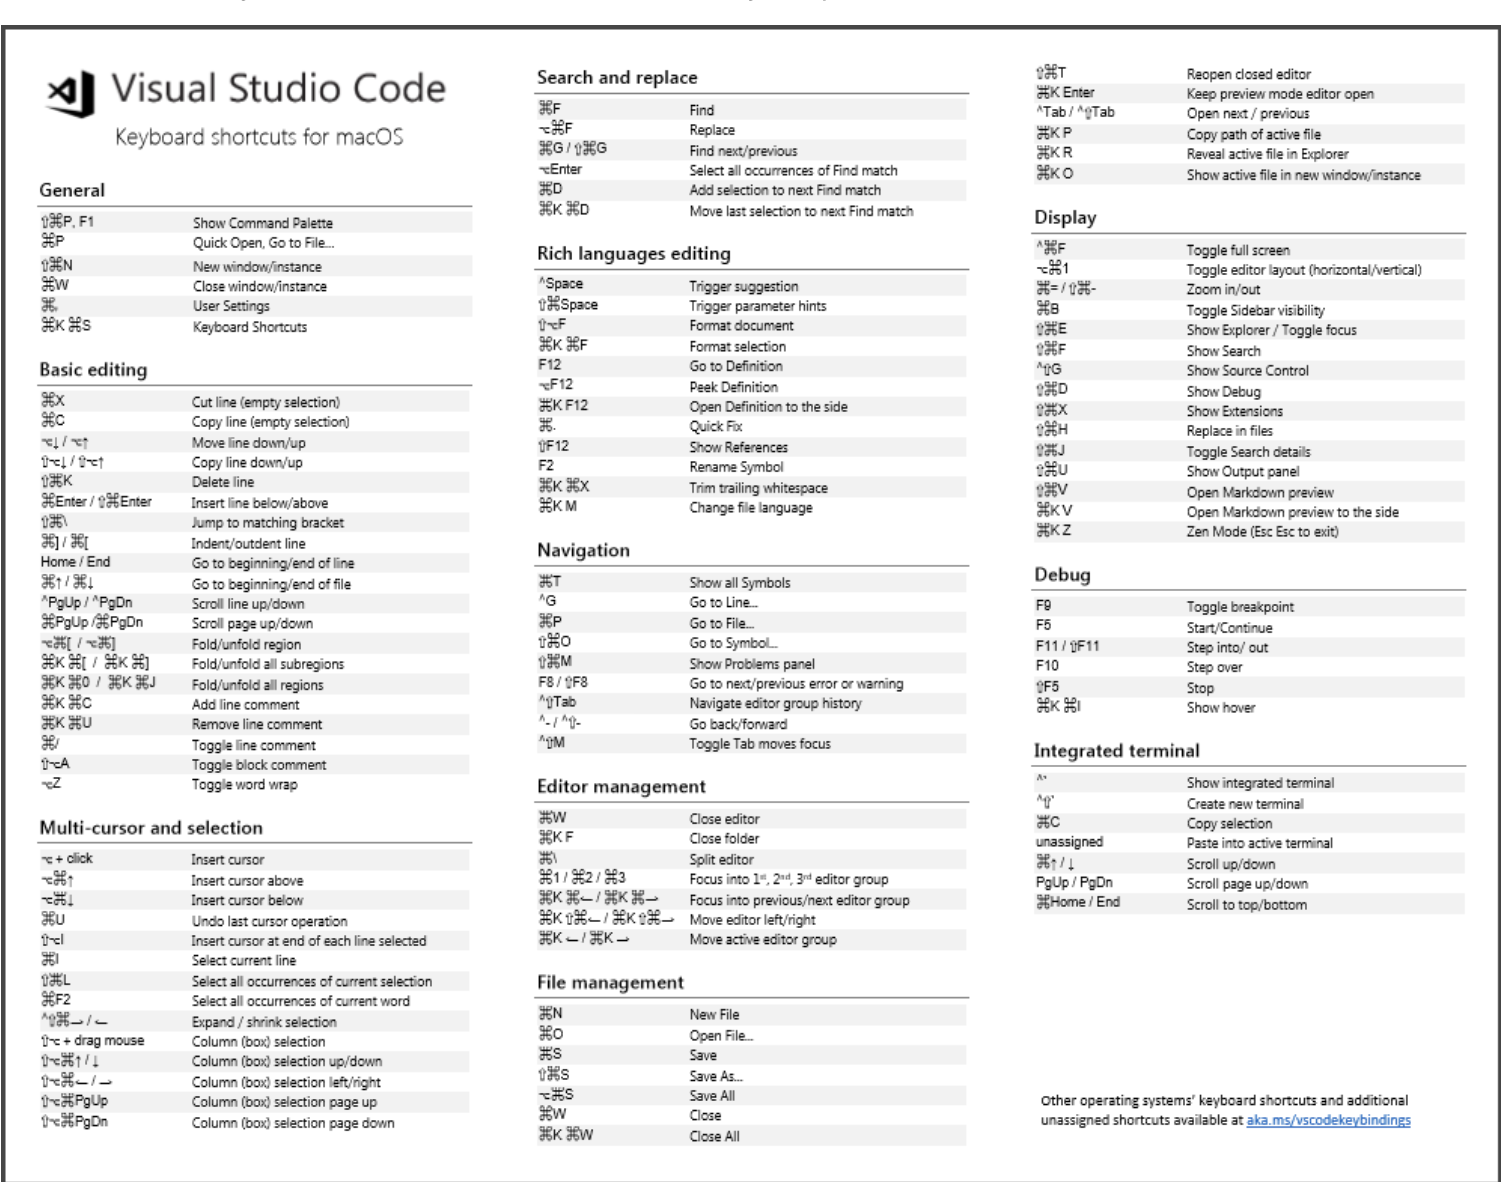 comment all visual studio for mac